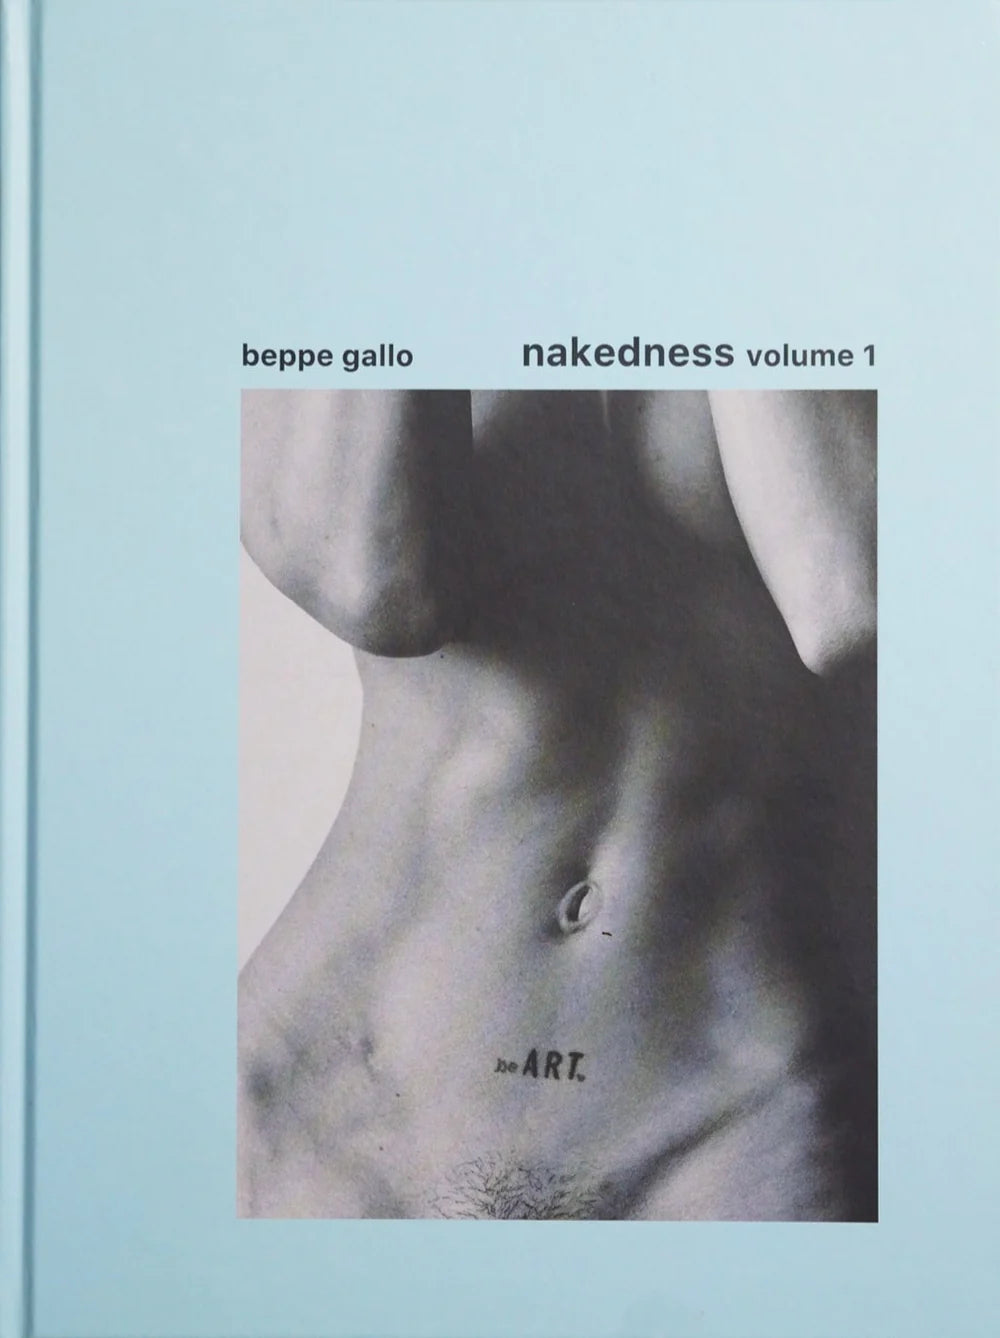 Nakedness Vol. 1 by Beppe Gallo